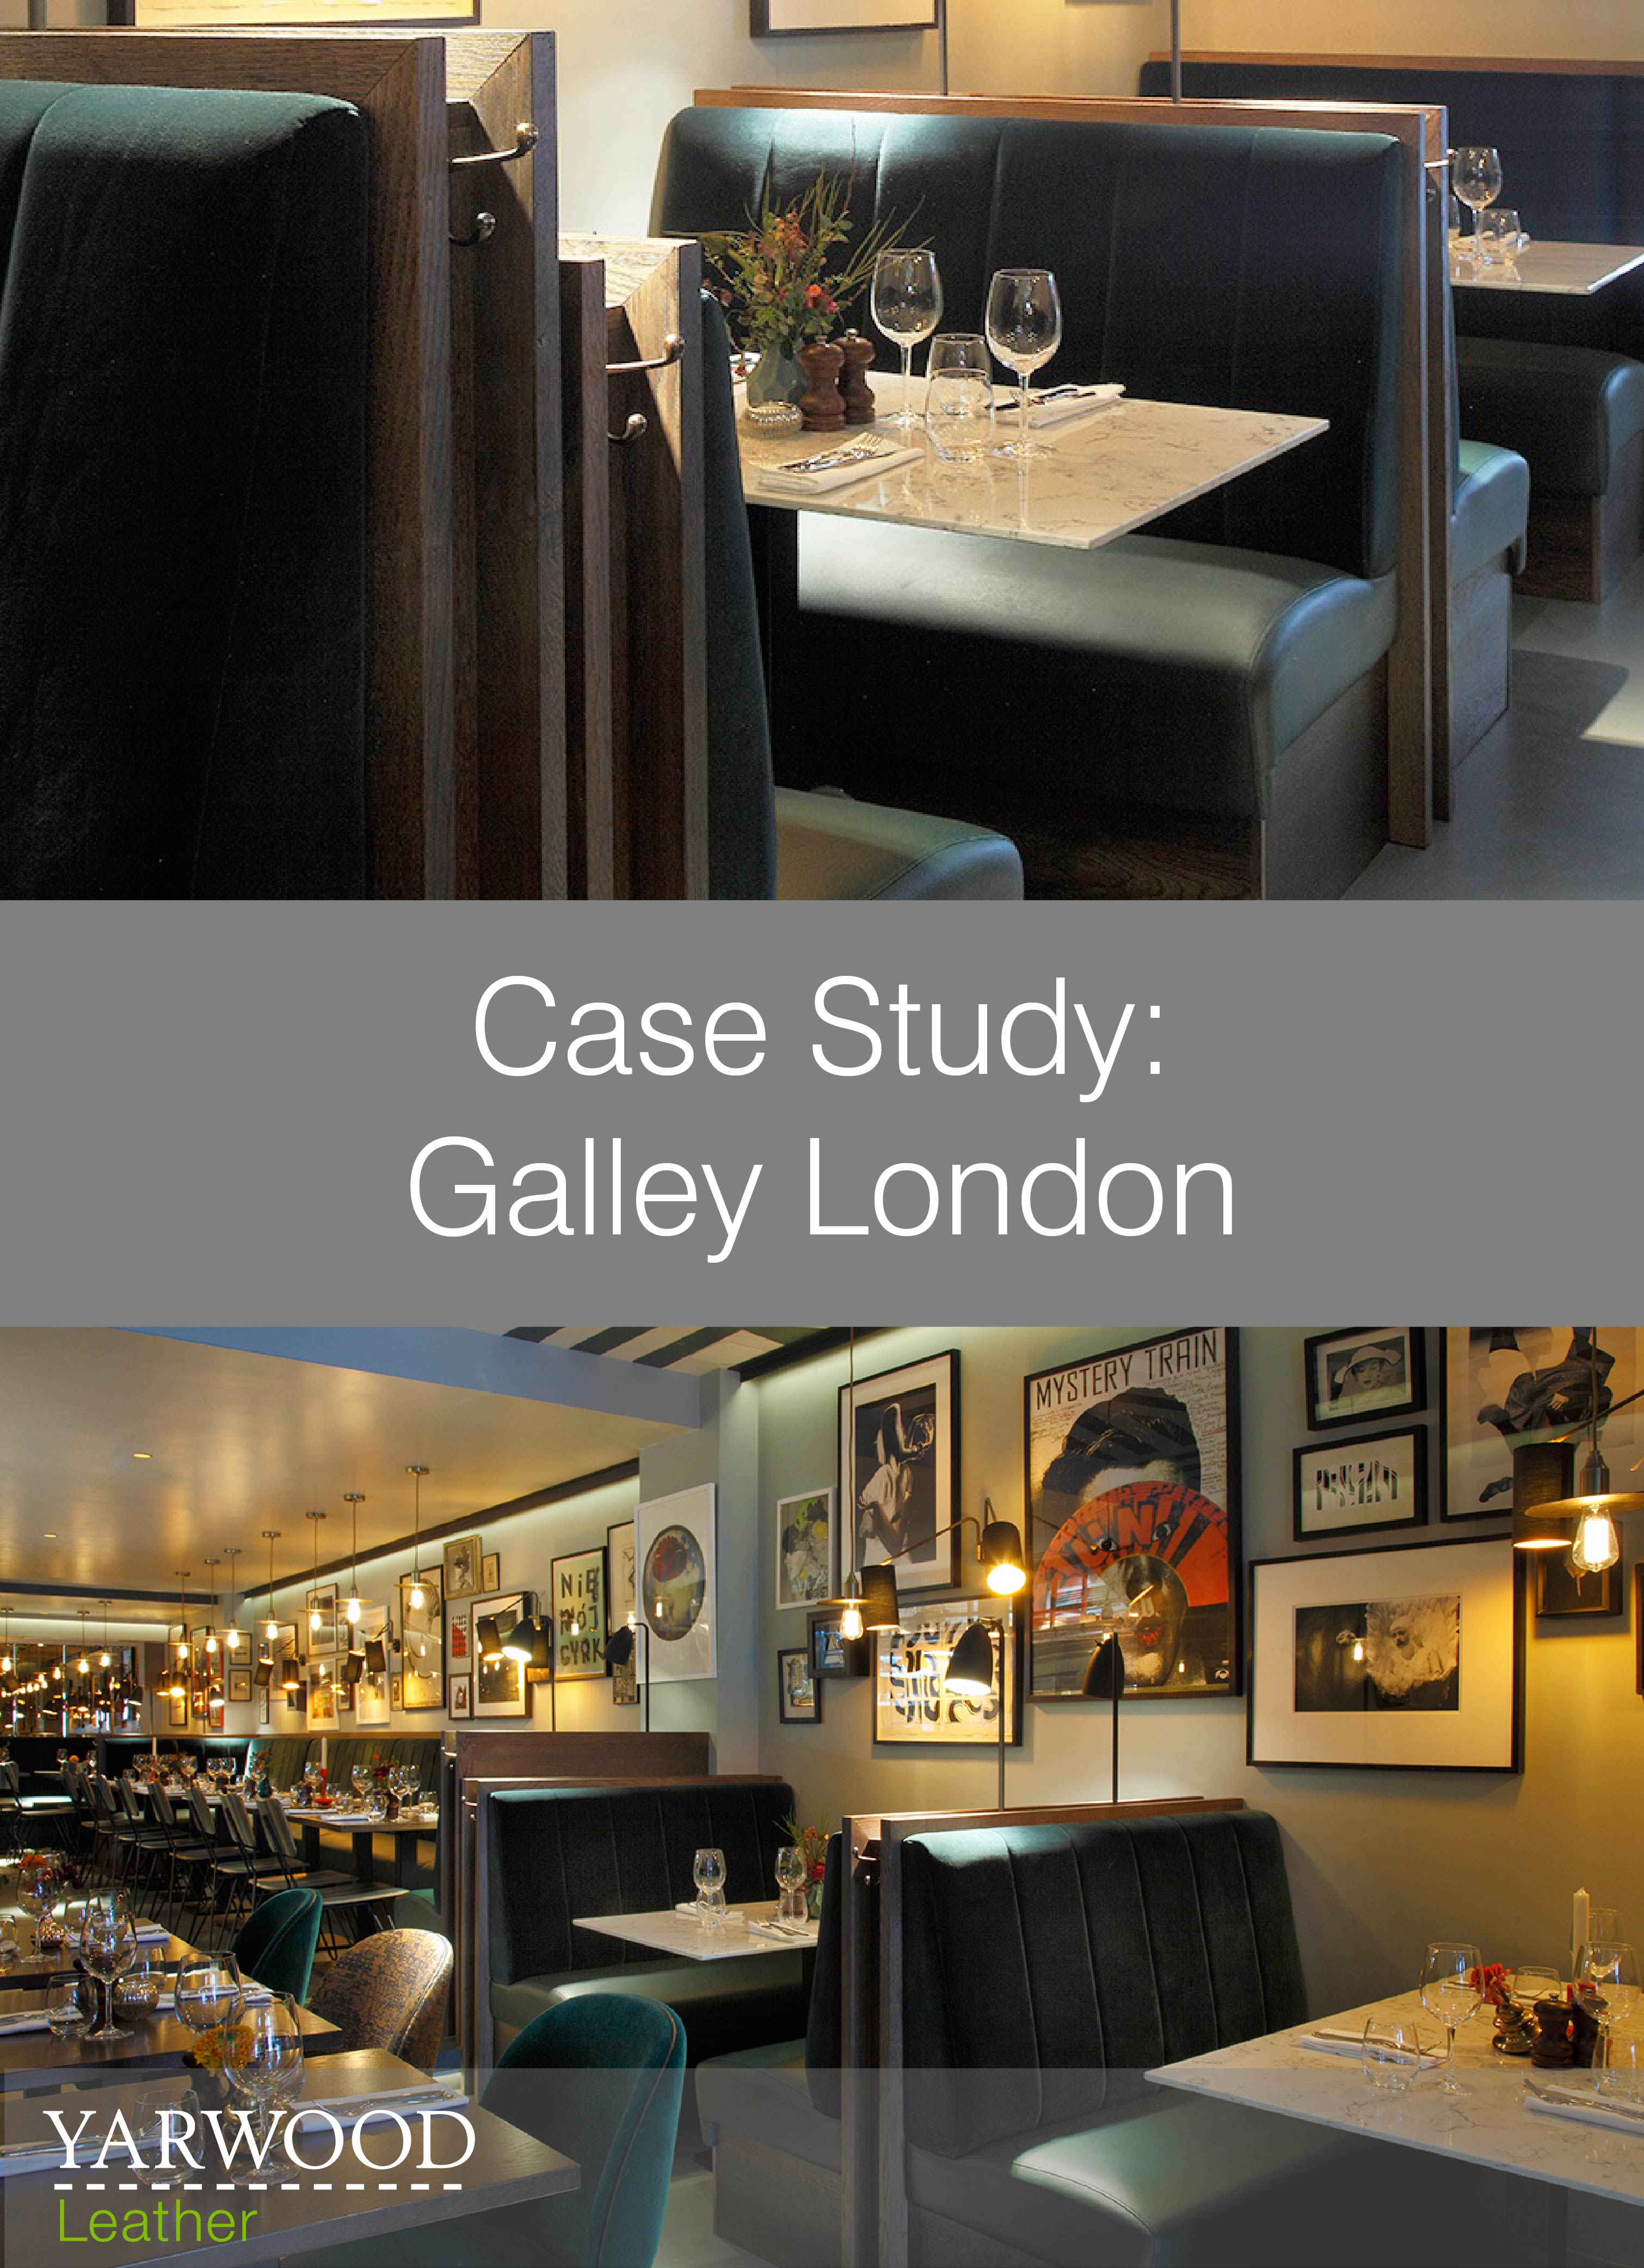 Faux leather in action, see Yarwood Leather's Dollaro range in this chic London restaurant